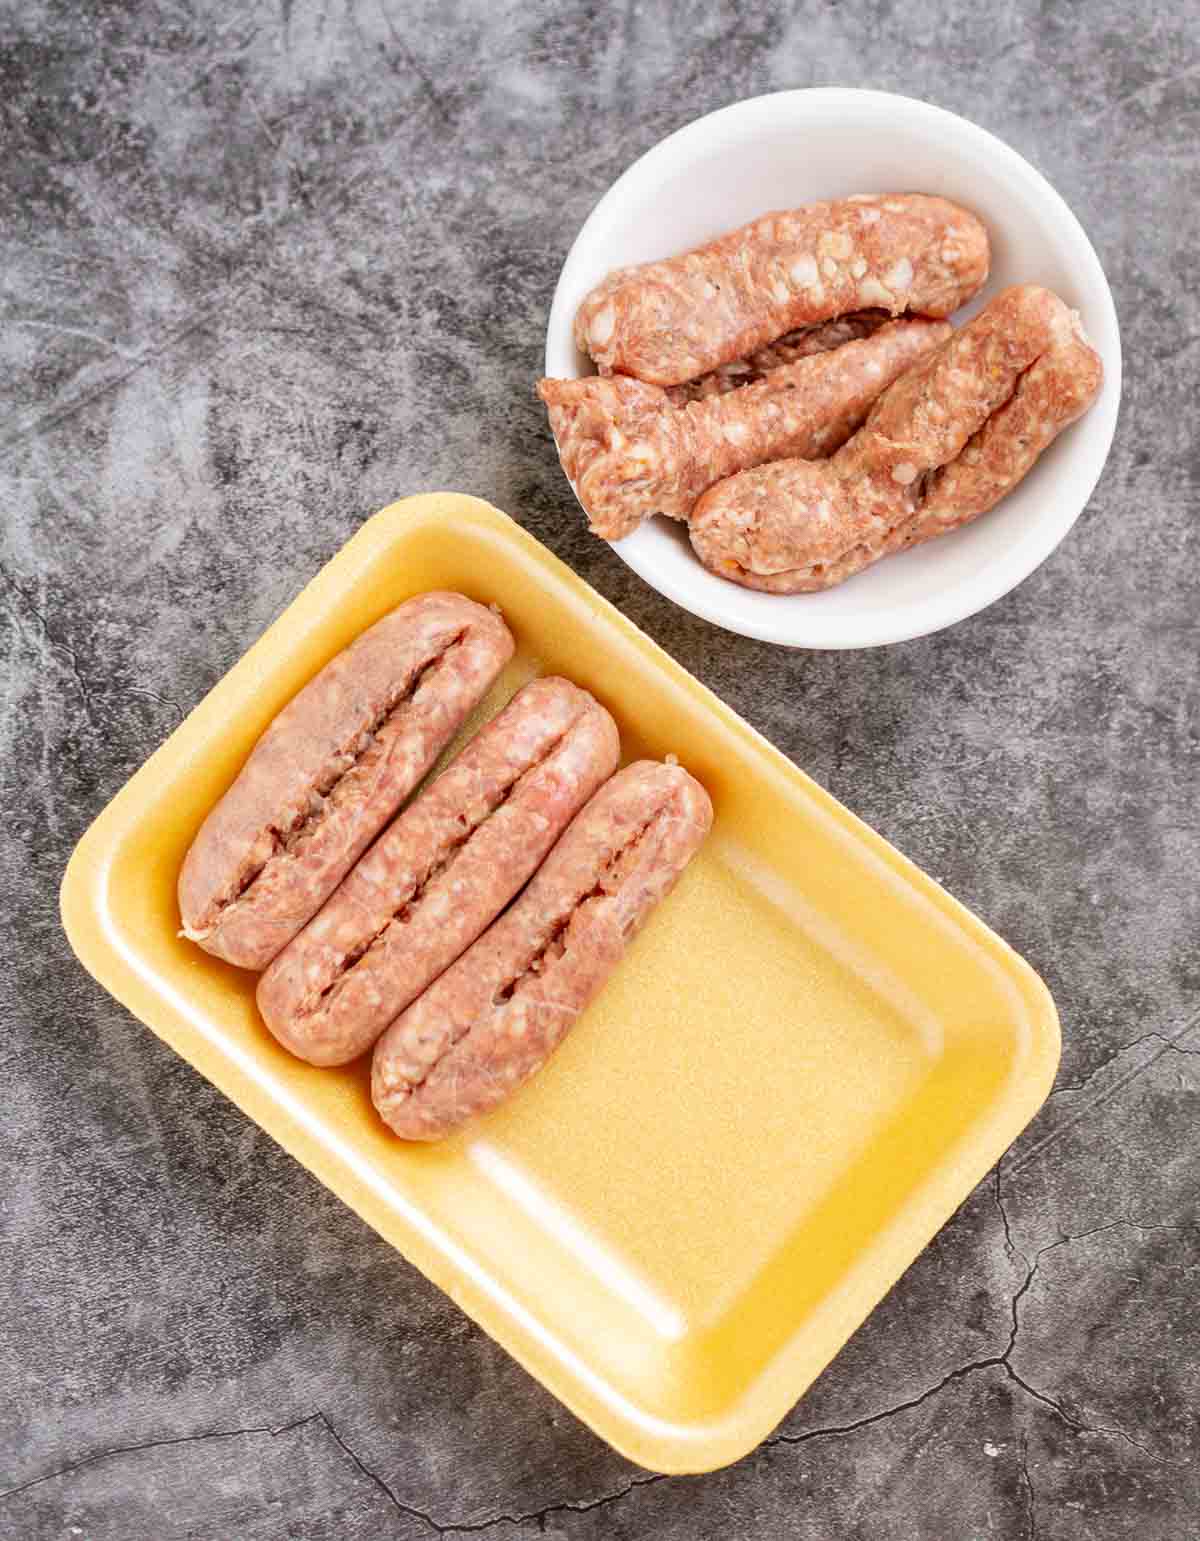 Picture showing how to remove ground sausage from casing